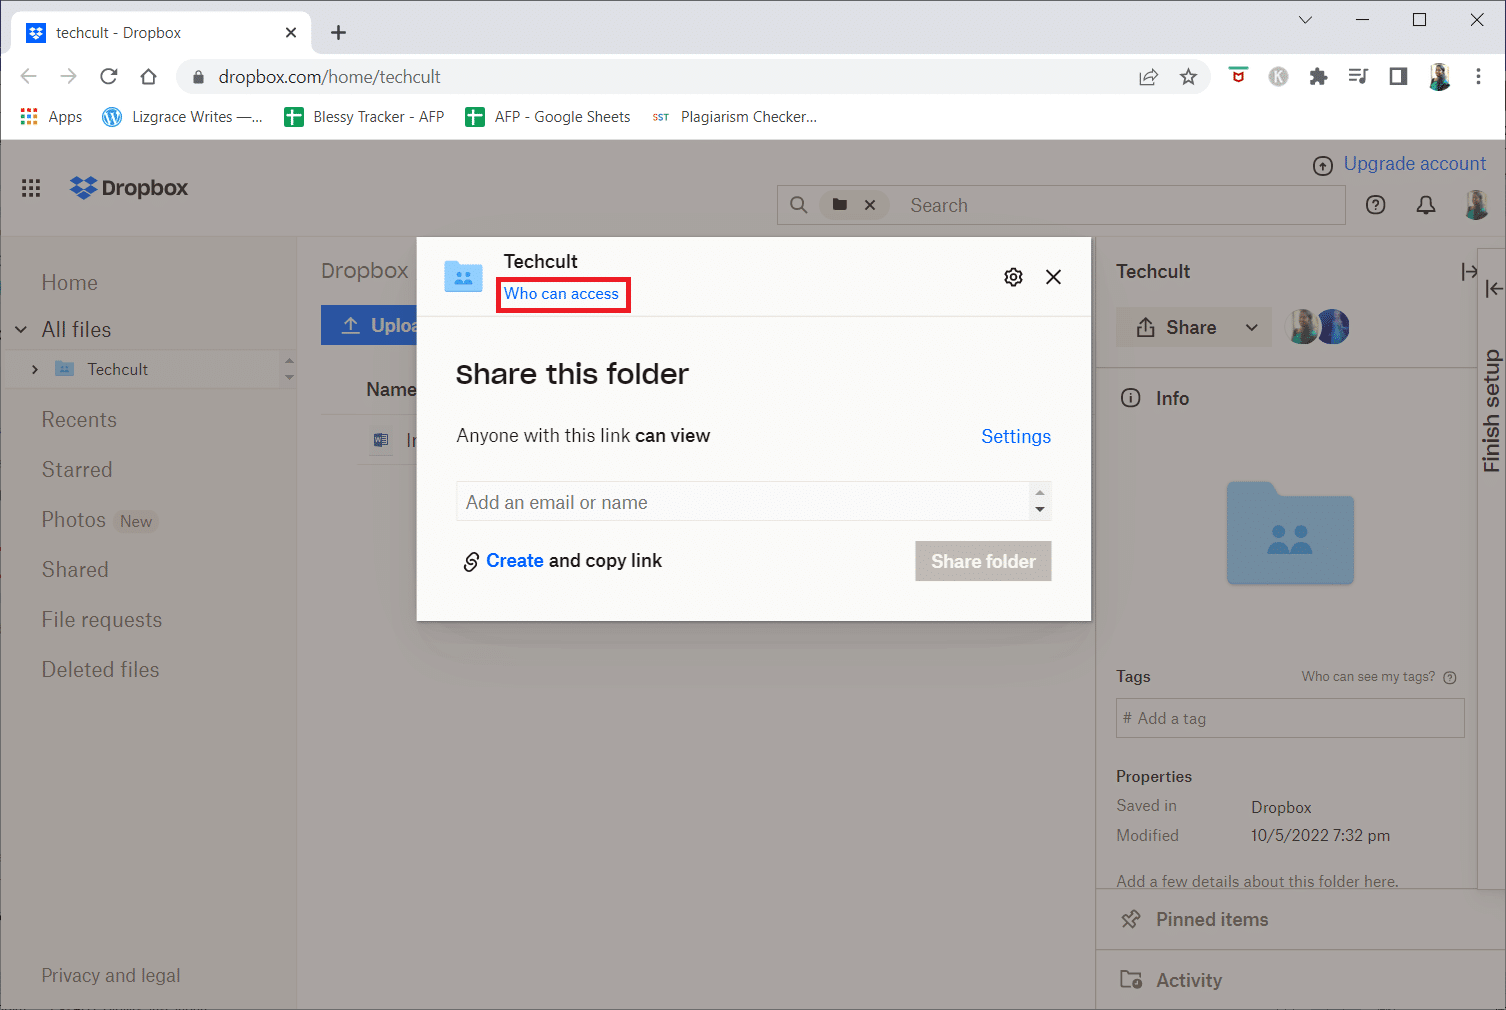 Click on Who can access from the top, under the folder name